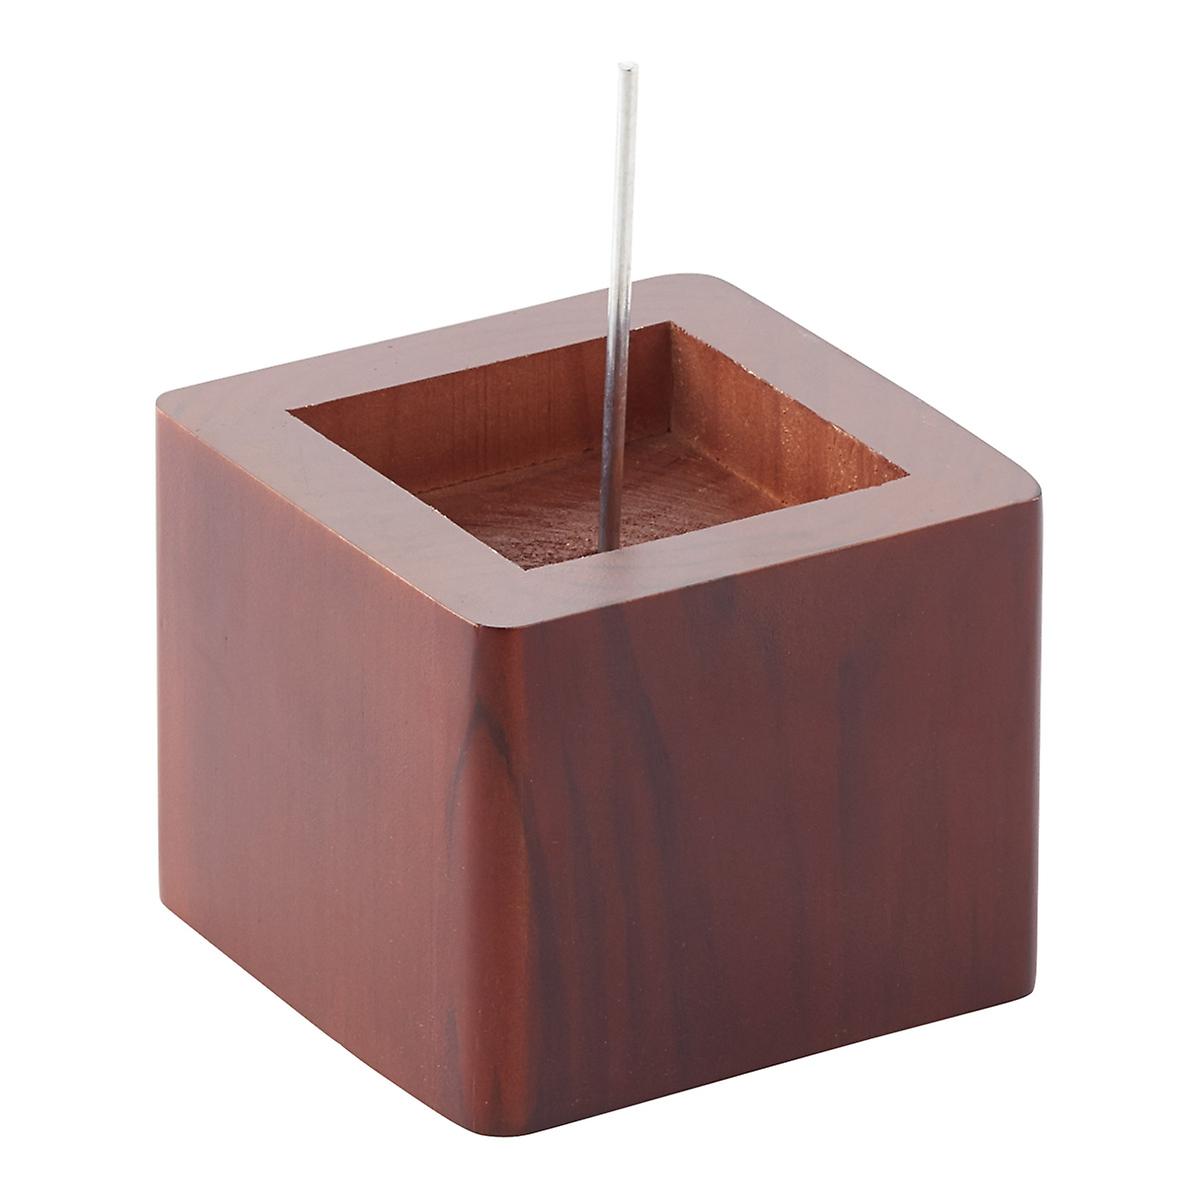 Walnut Solid Wood Bed Risers | The Container Store